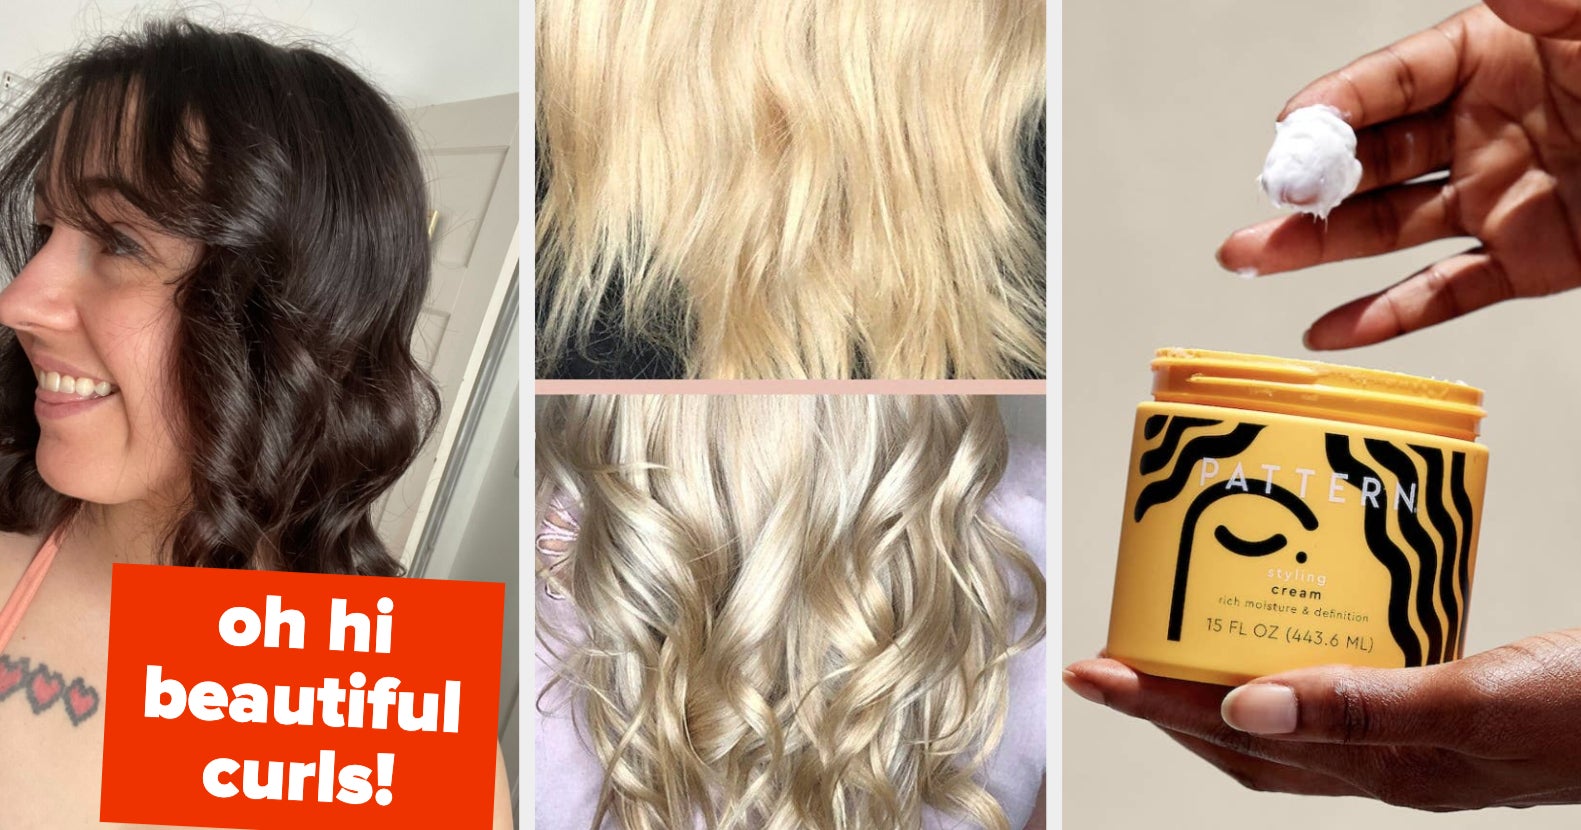 28 Hair Products That Cost Extra But Are Worth It